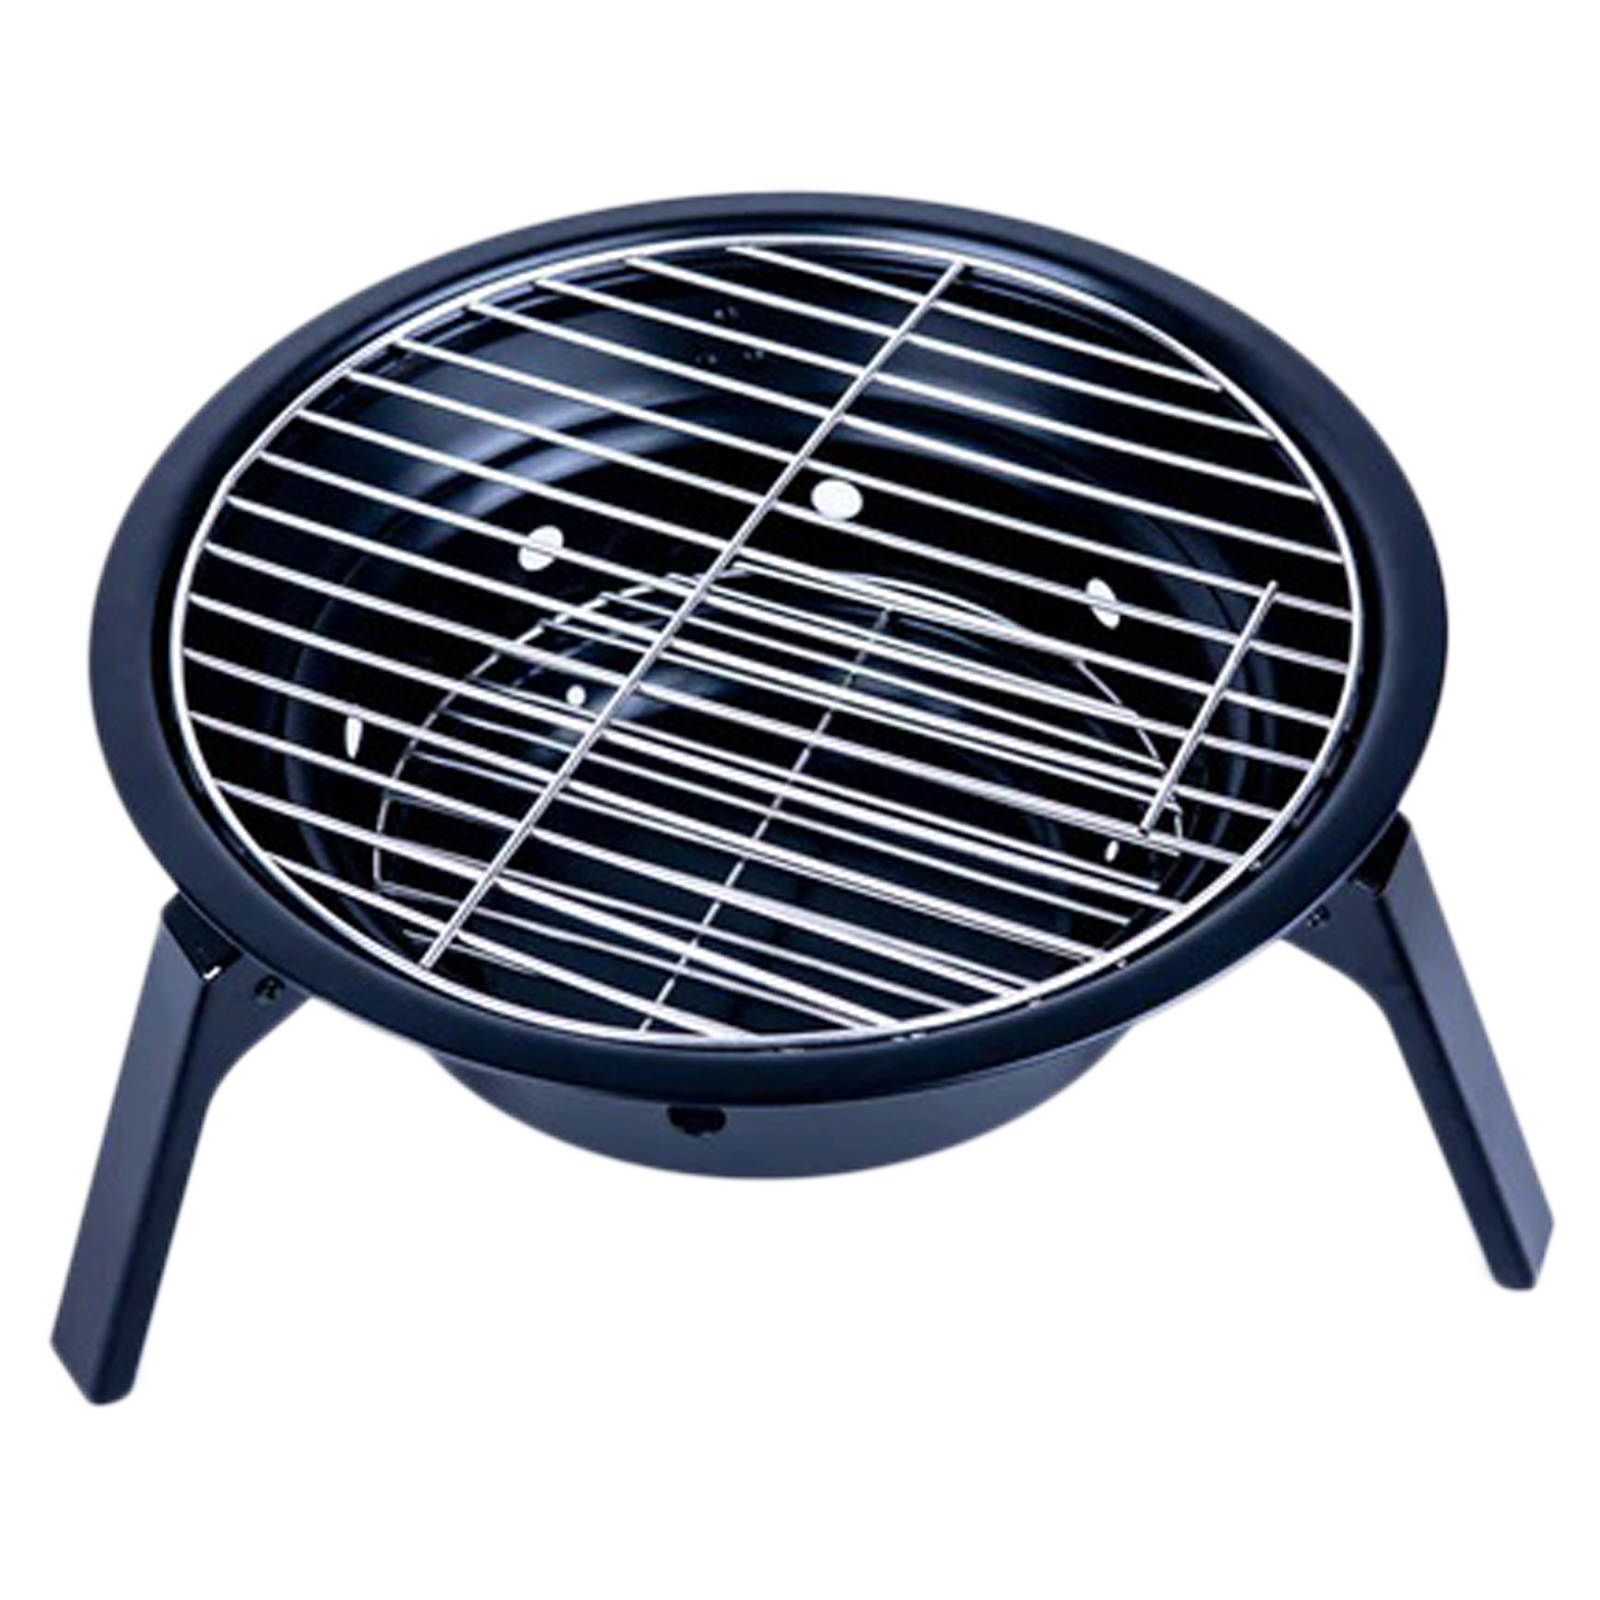 Peng Essential Foldable Charcoal Built-in Barbeque Grill (Flame Safety, Black)